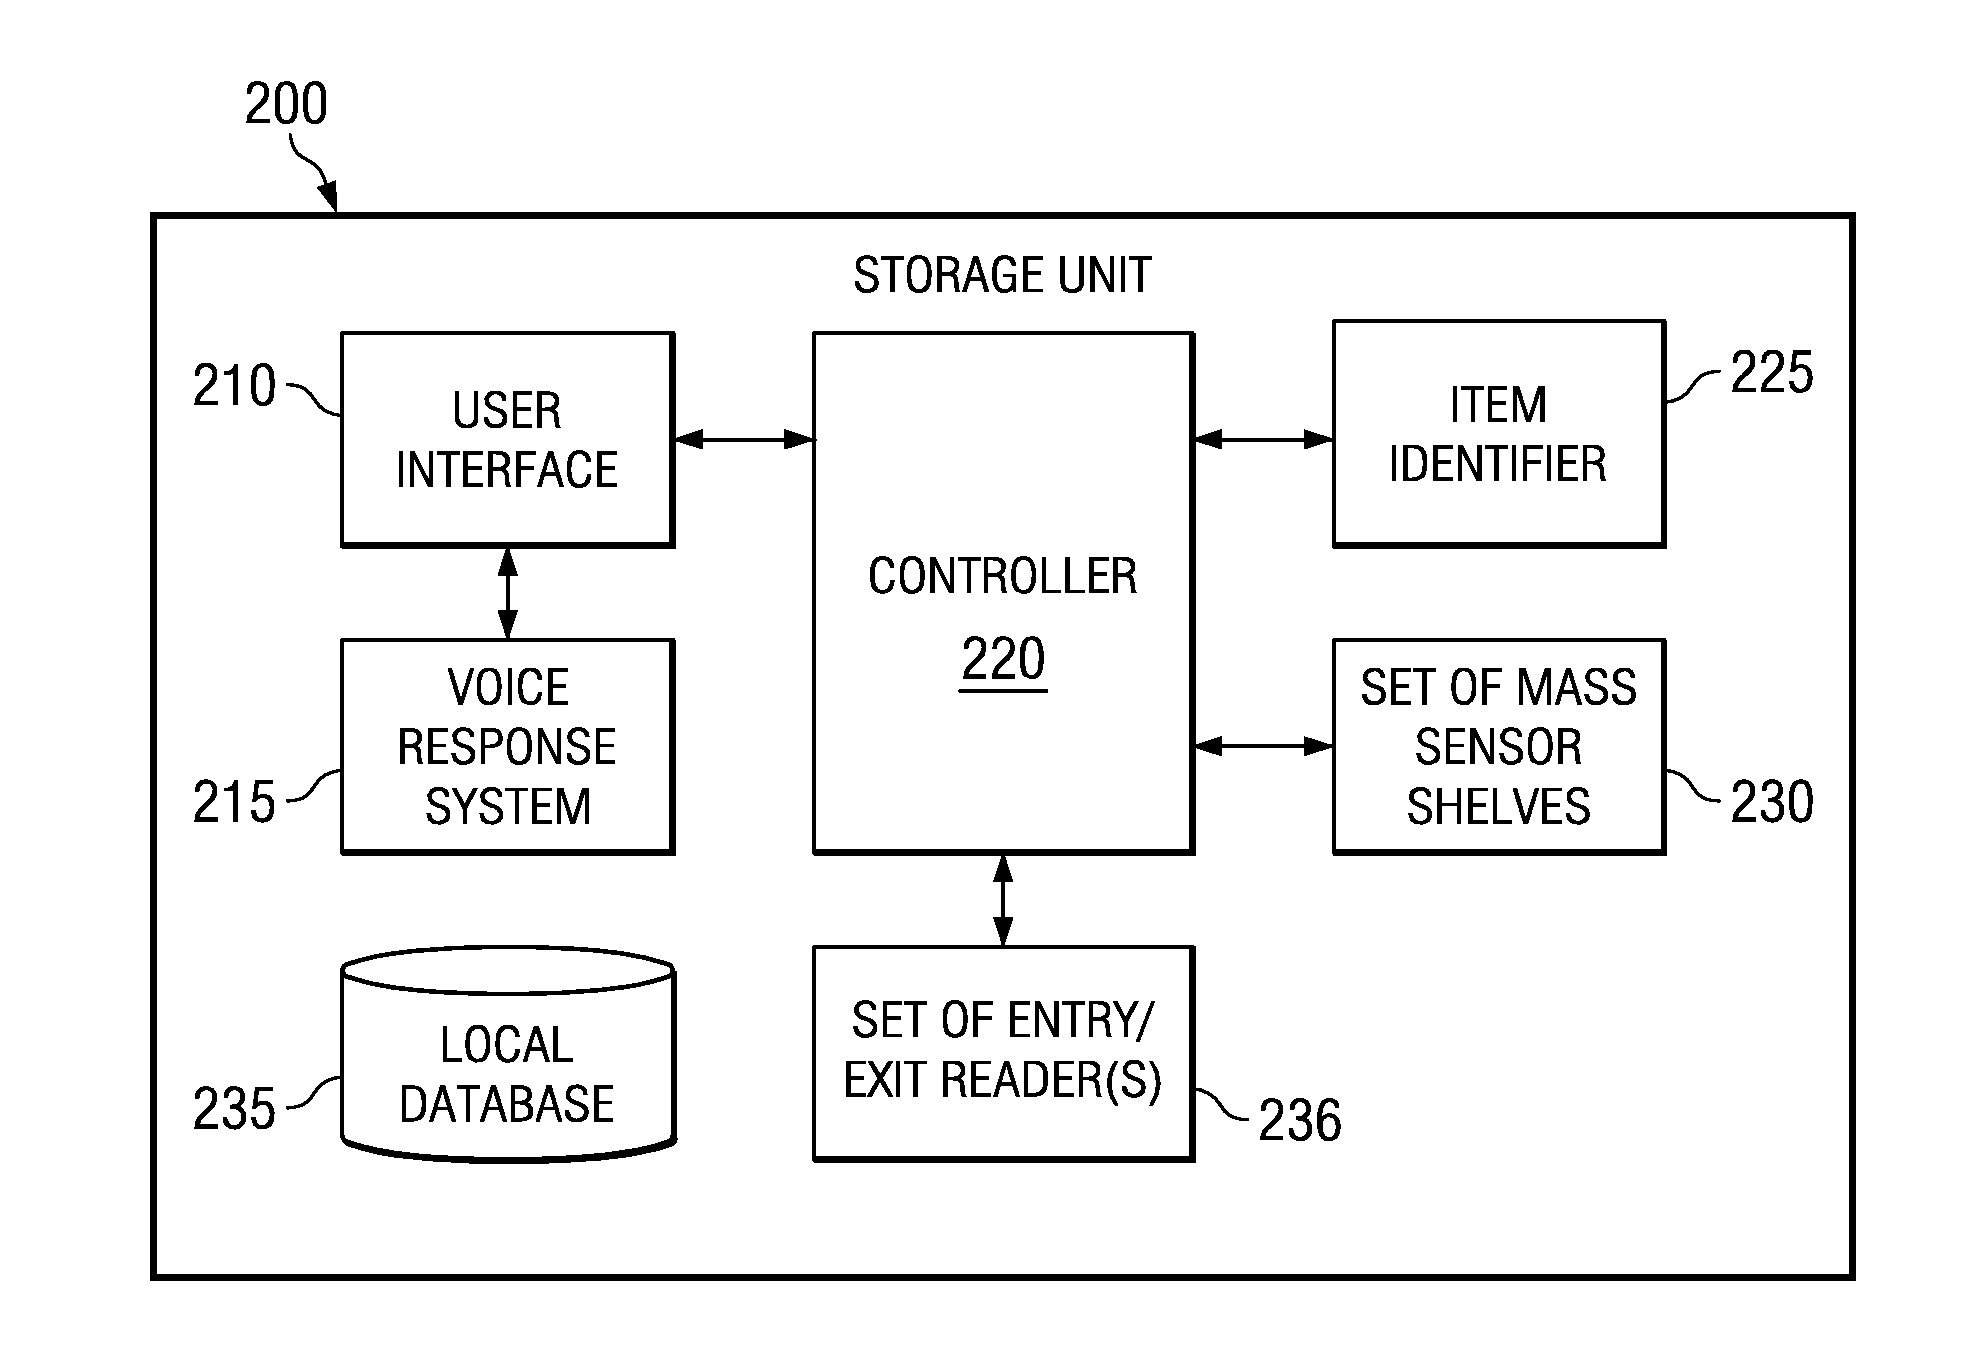 Method and apparatus for tracking usage of an item within a storage unit using location sensors